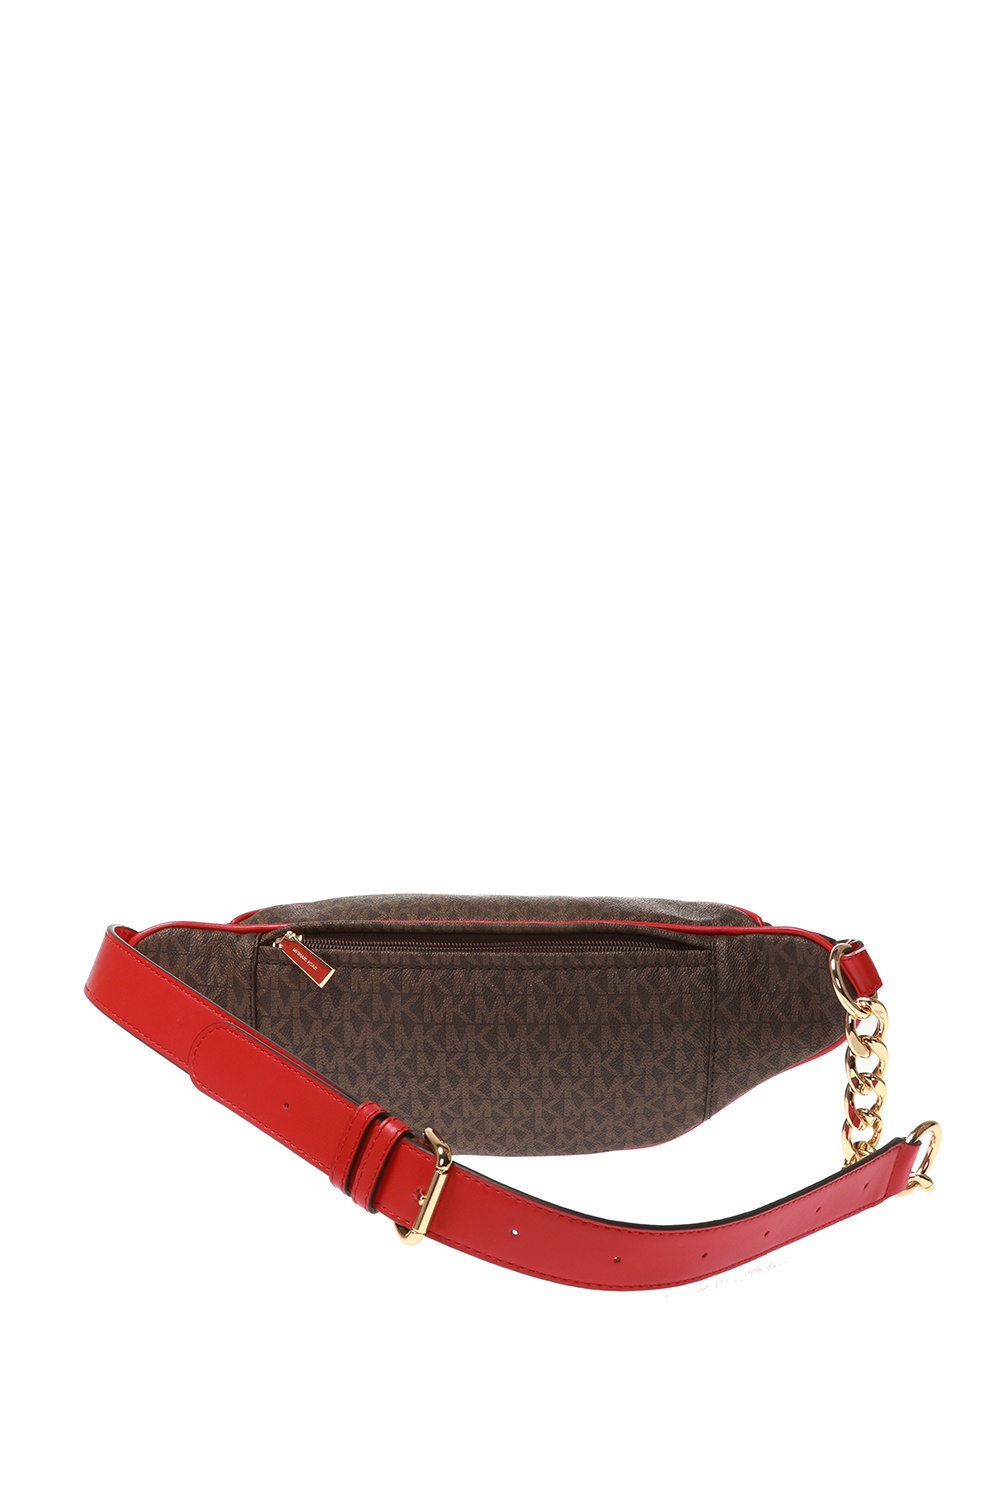 red michael kors fanny pack